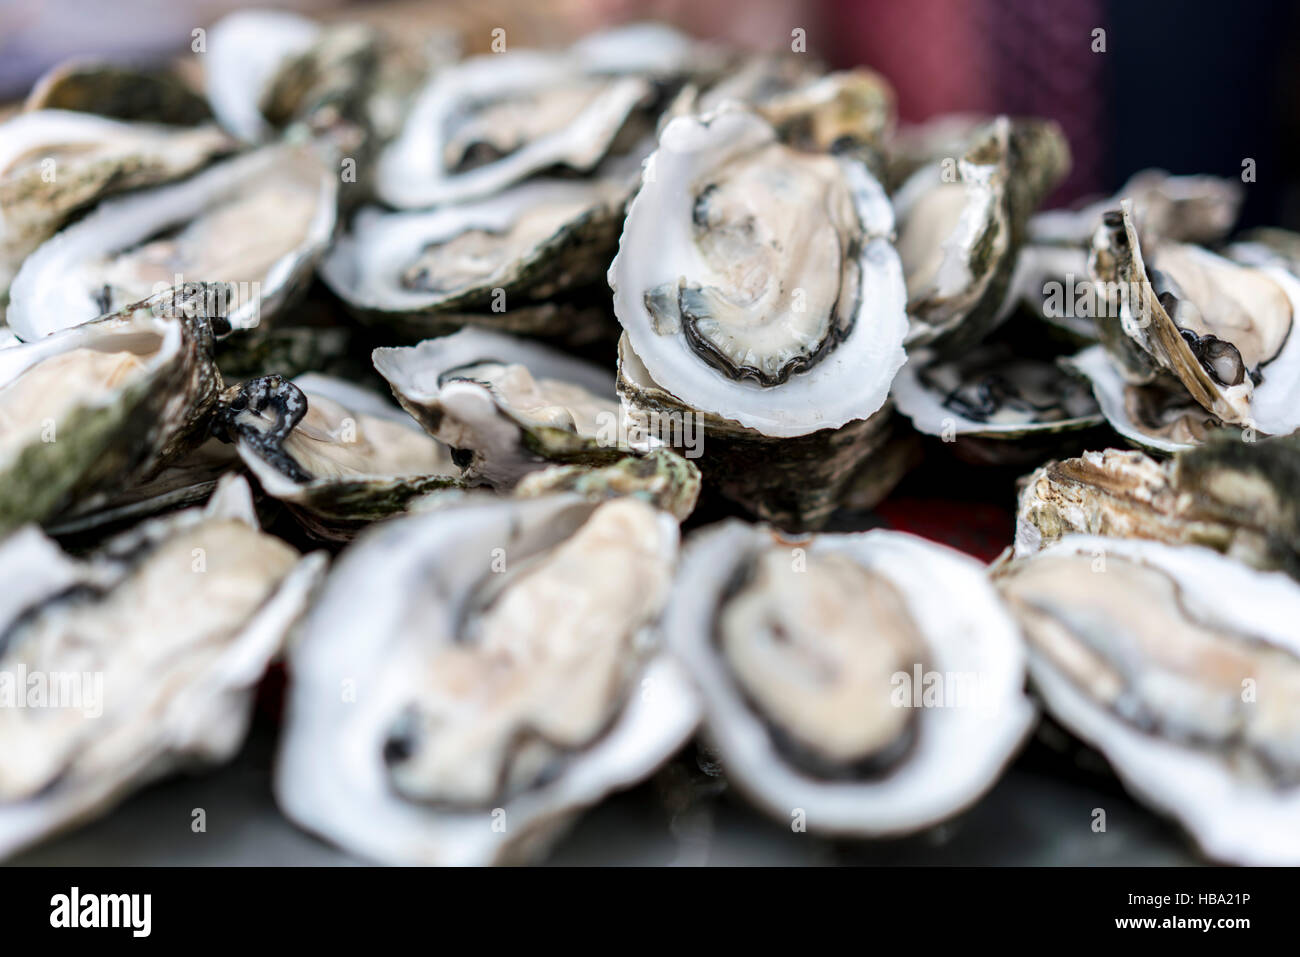 Fresh oysters for sale at Market in Hainan China Stock Photo